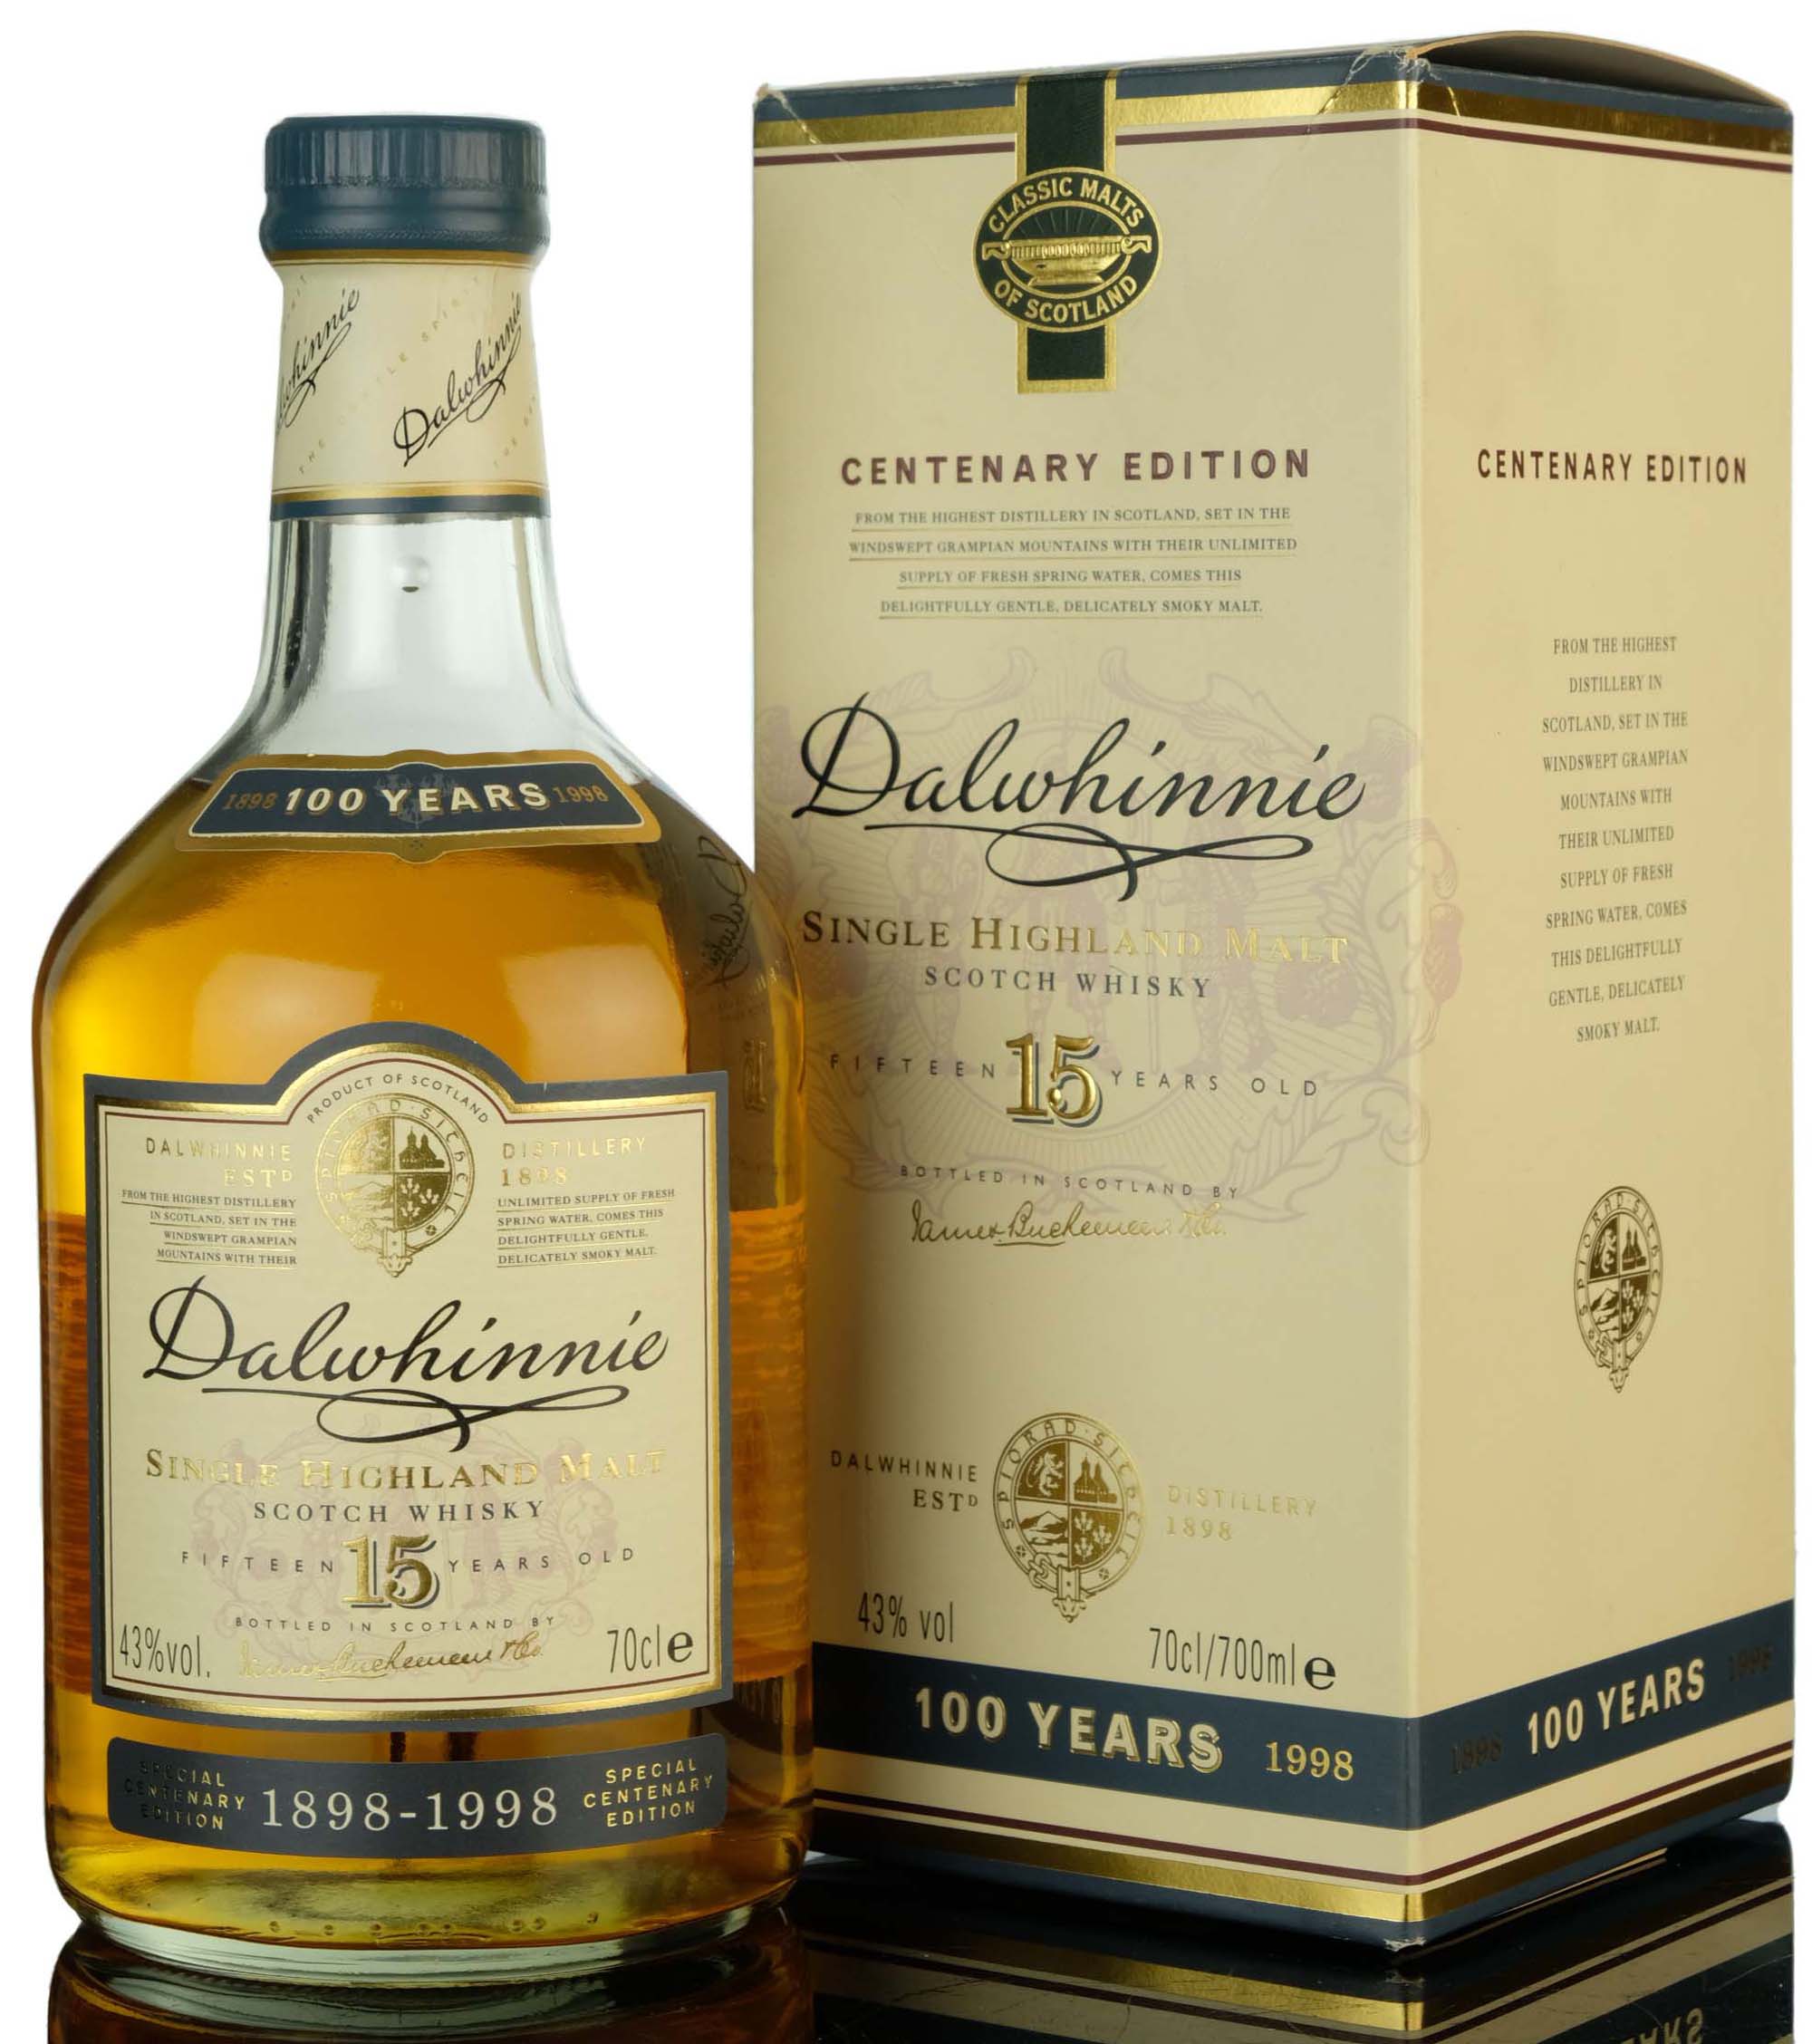 Dalwhinnie 15 Year Old - Centenary Edition 1898-1998